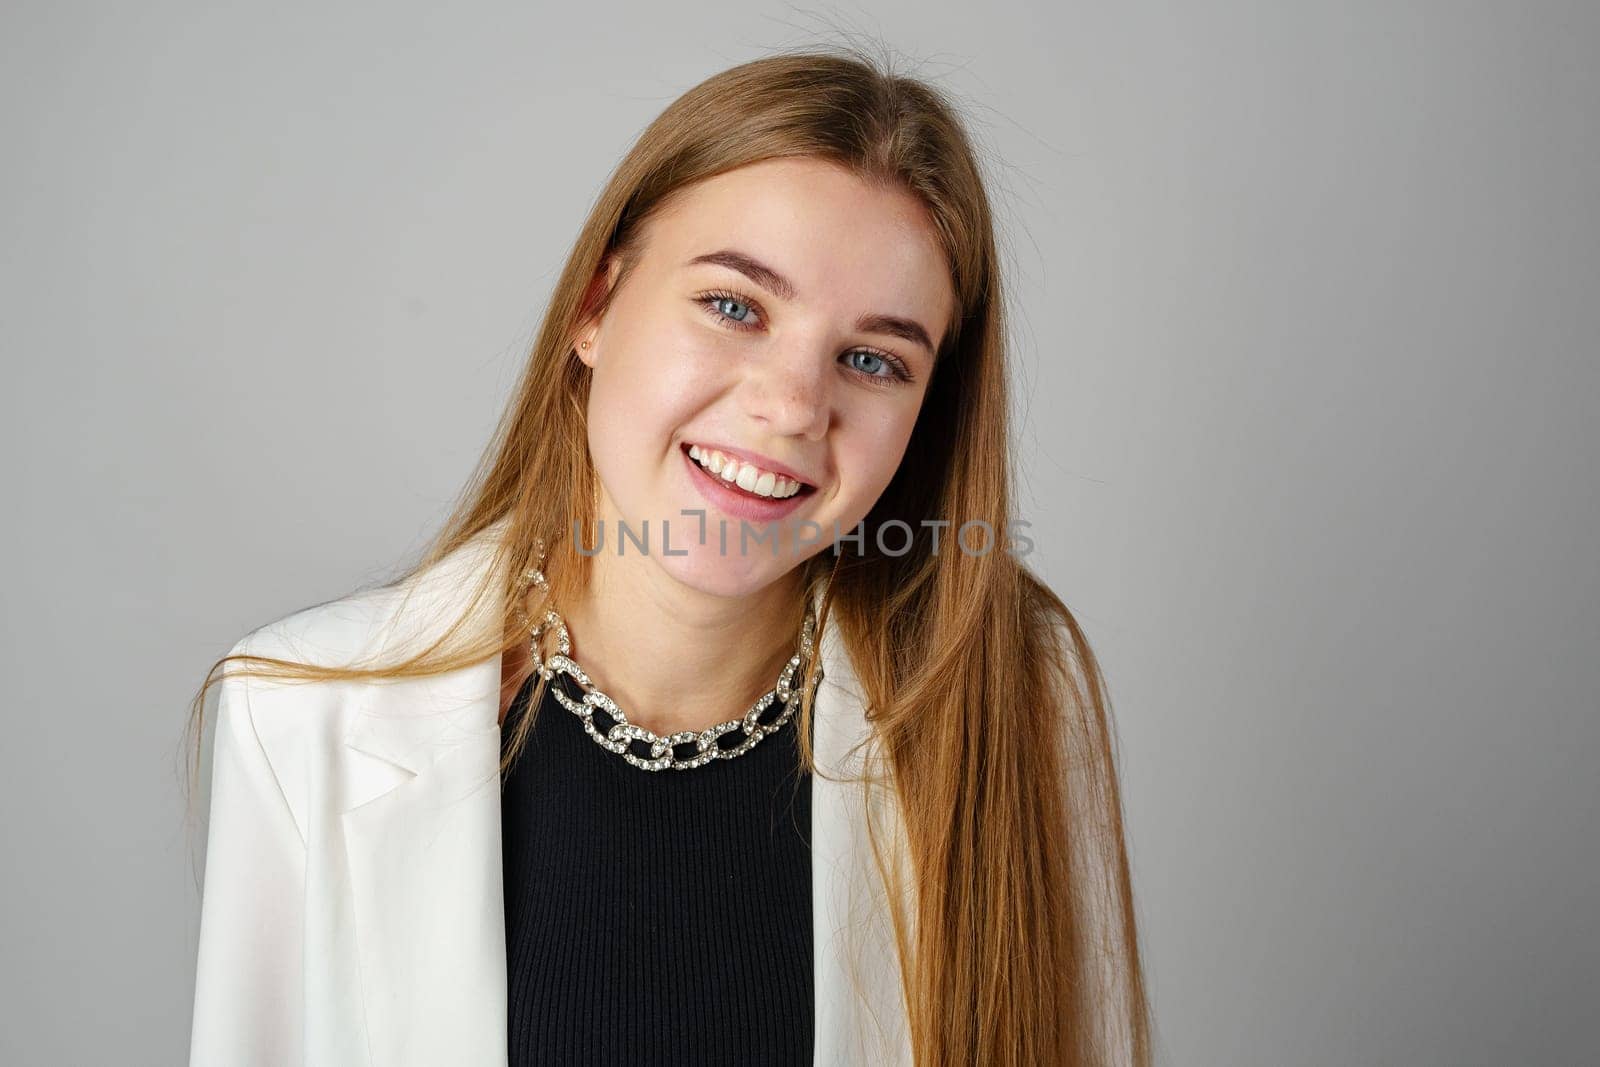 Woman in Black Top and White Jacket Posing in Studio close up